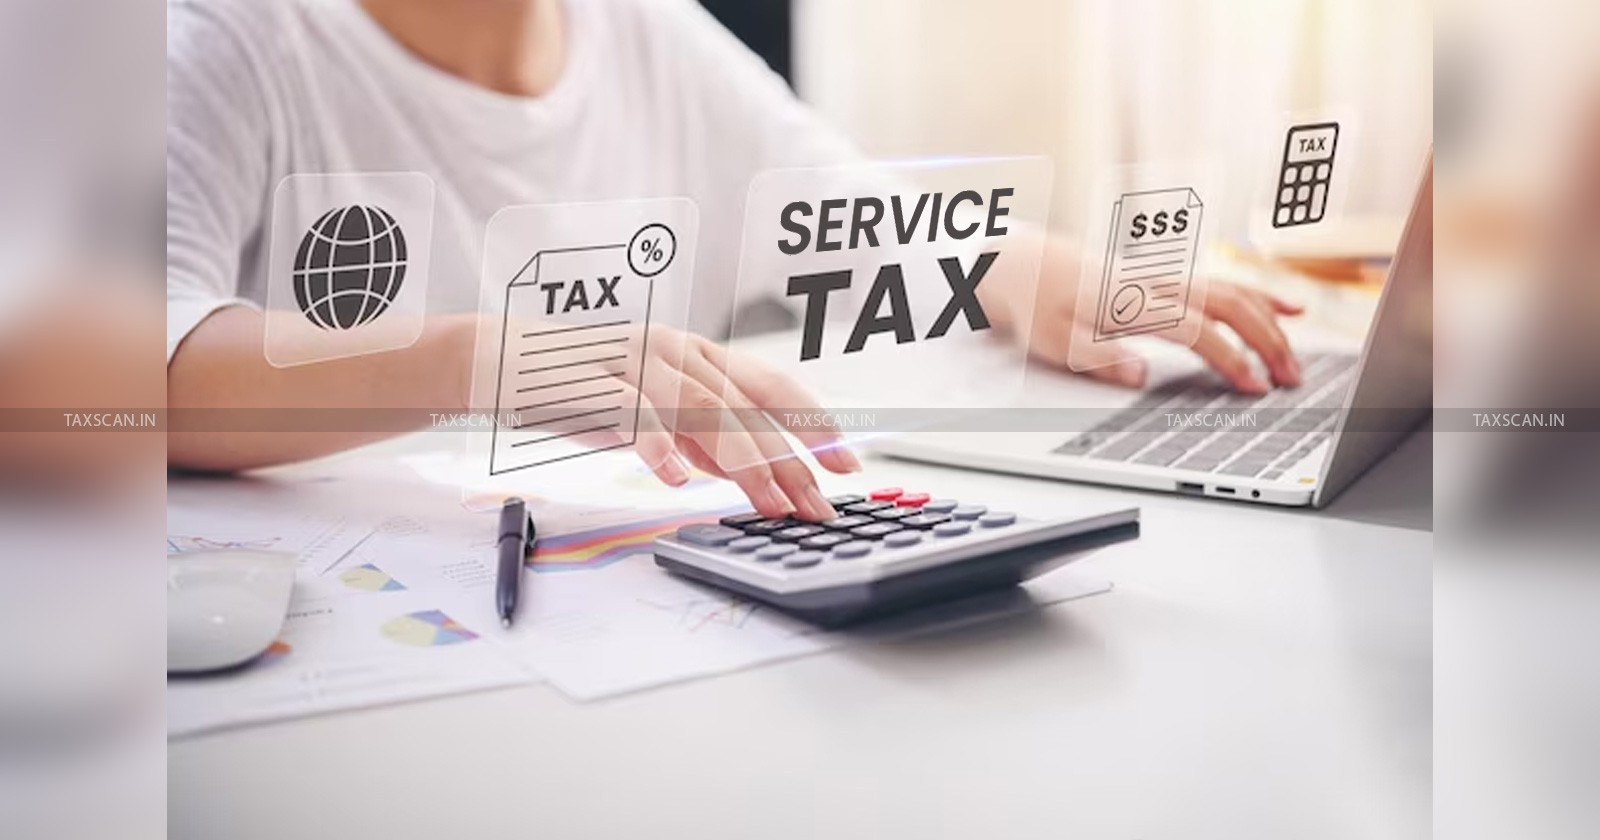 Service Tax - income tax - income tax - State Government of Karnataka - Excise and Service Tax Appellate Tribuna - TAXSCAN